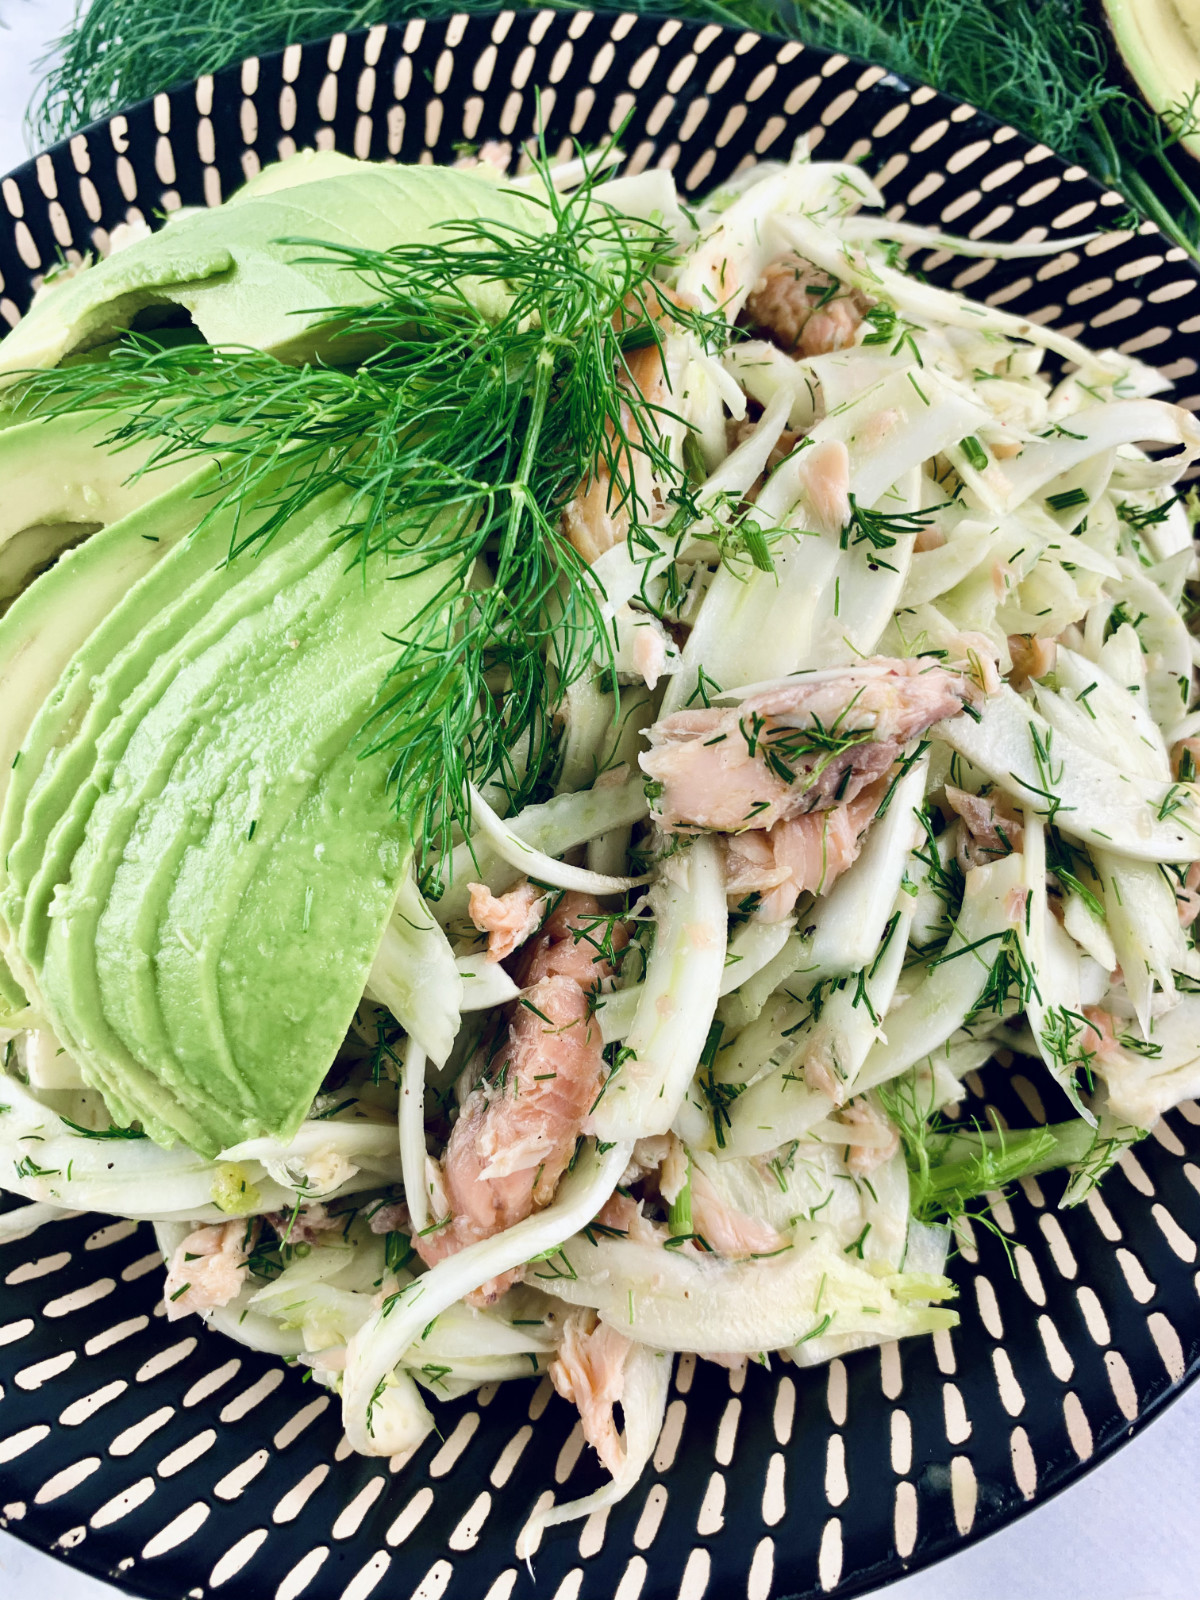 Close-up of Smoked trout & fennel salad on a patterned platter with dill & avocado on the side.